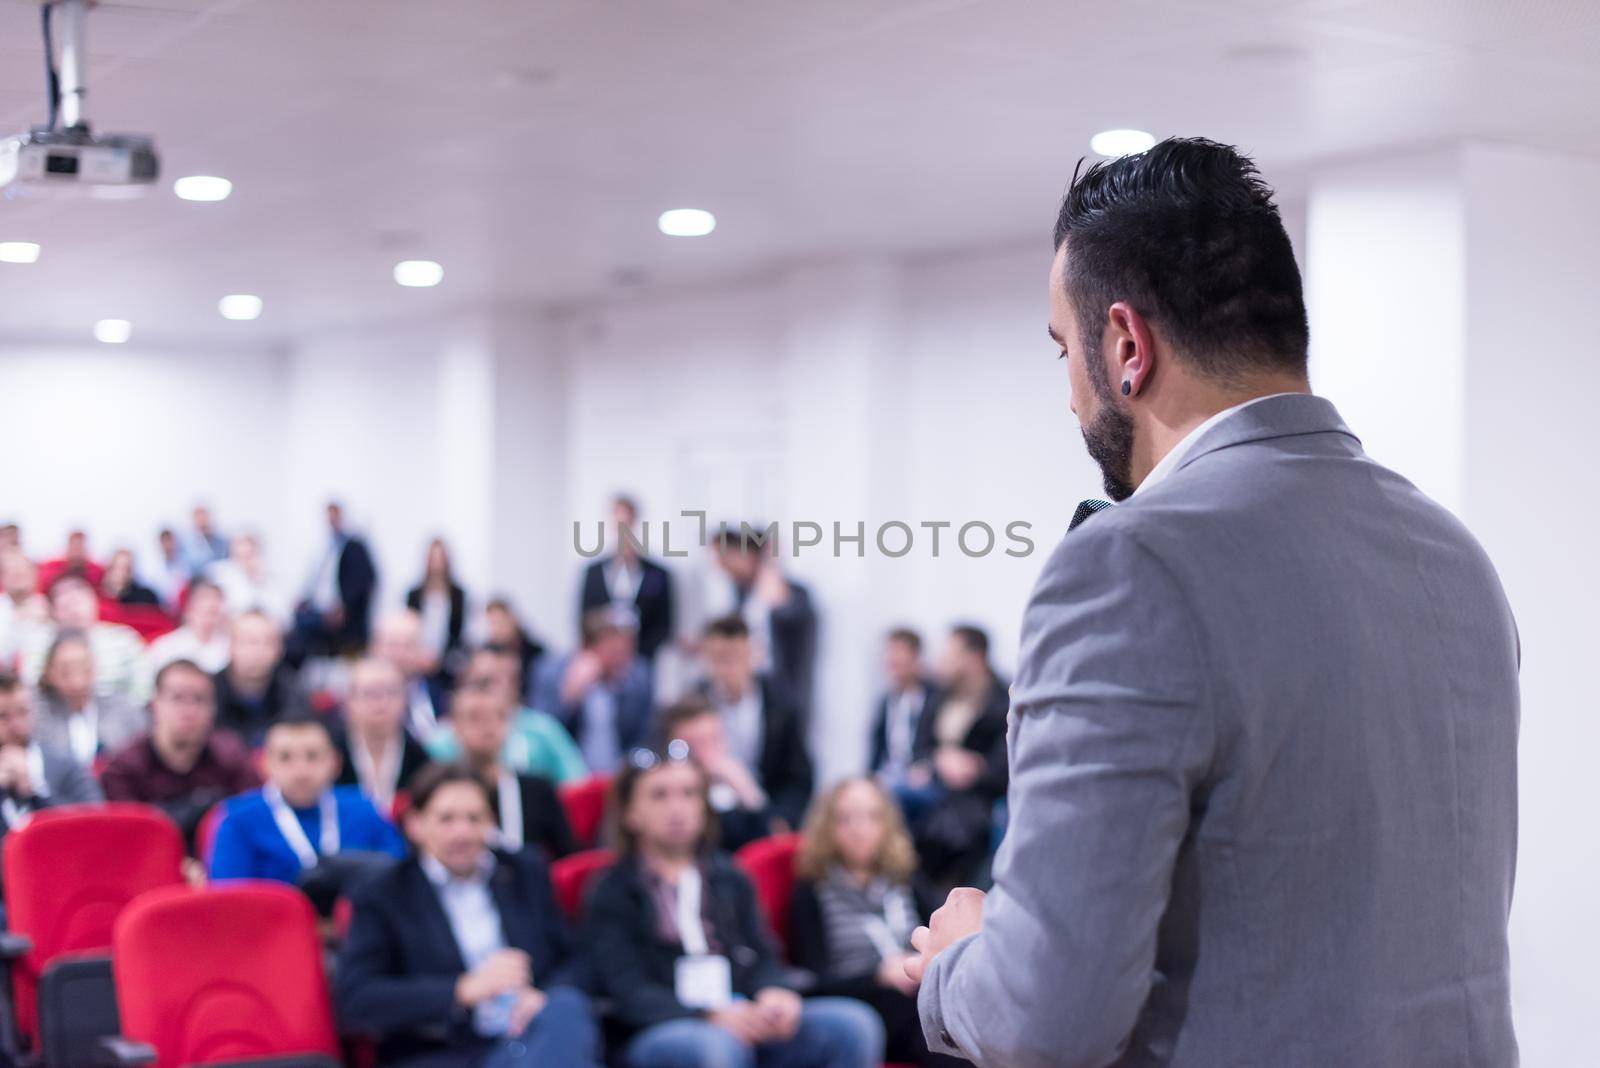 rear view of young successful businessman at business conference room with public giving presentations. Audience at the conference hall. Entrepreneurship club